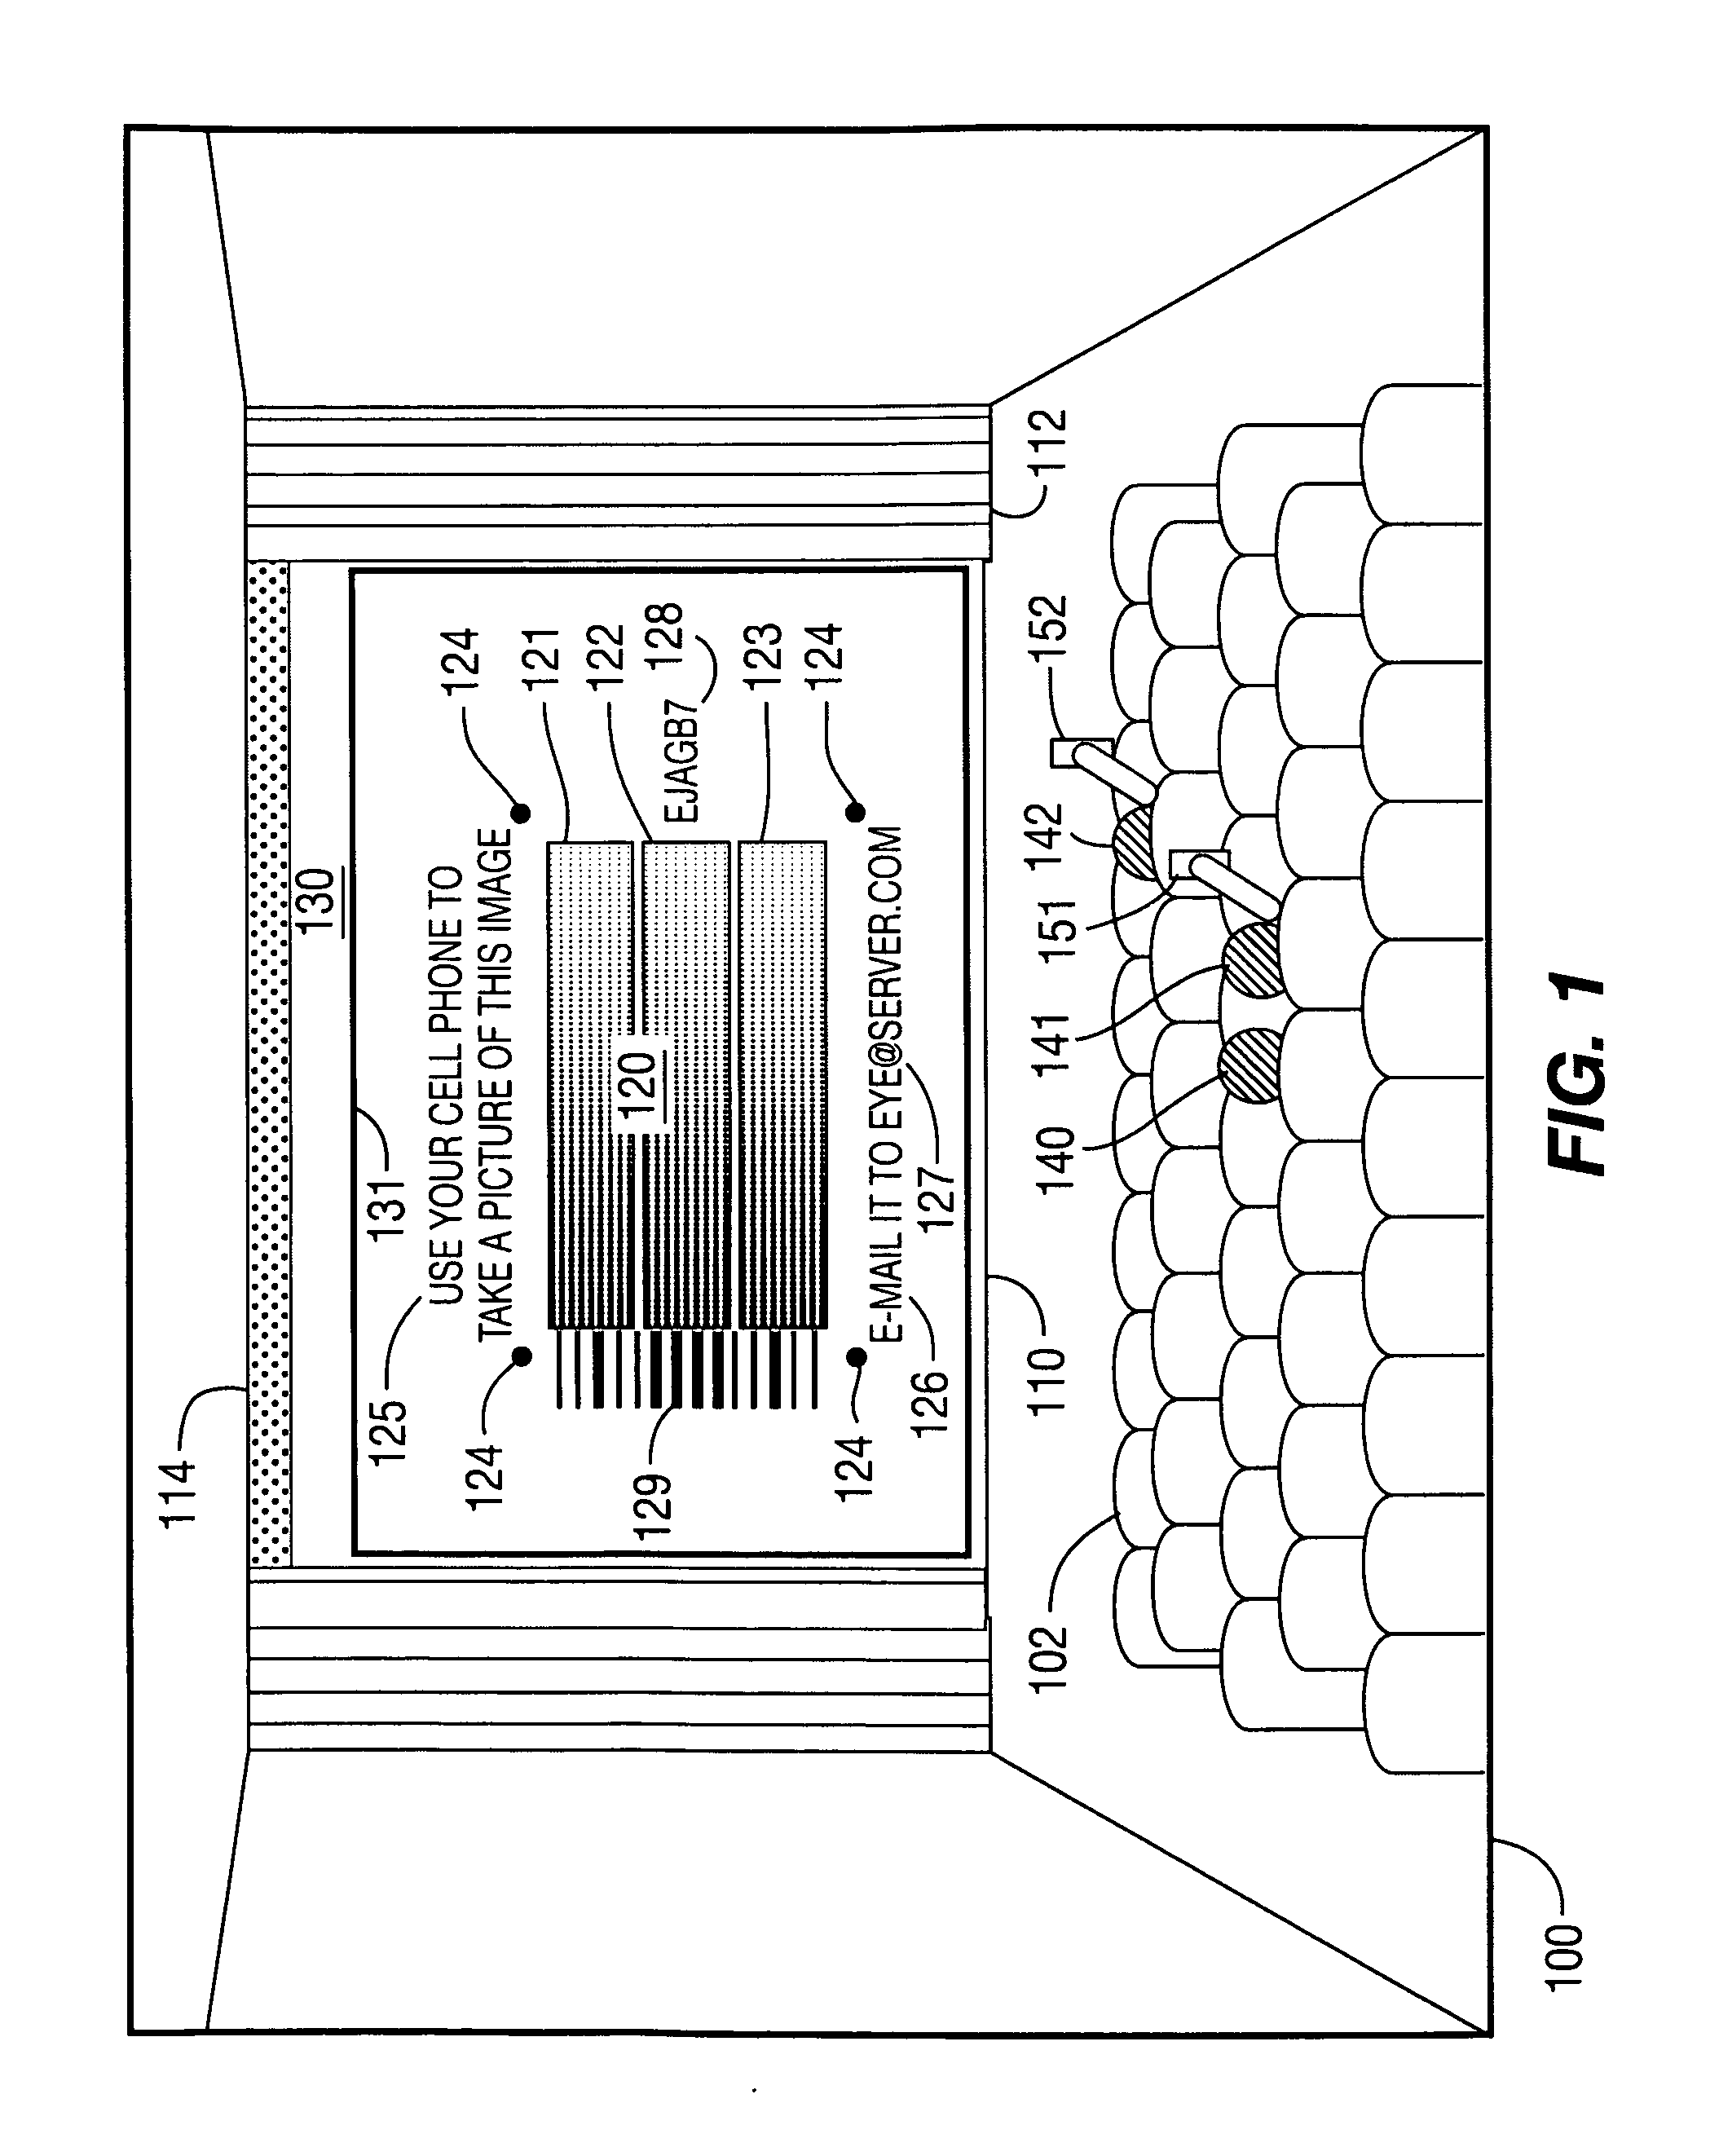 Method and system for monitoring a display venue